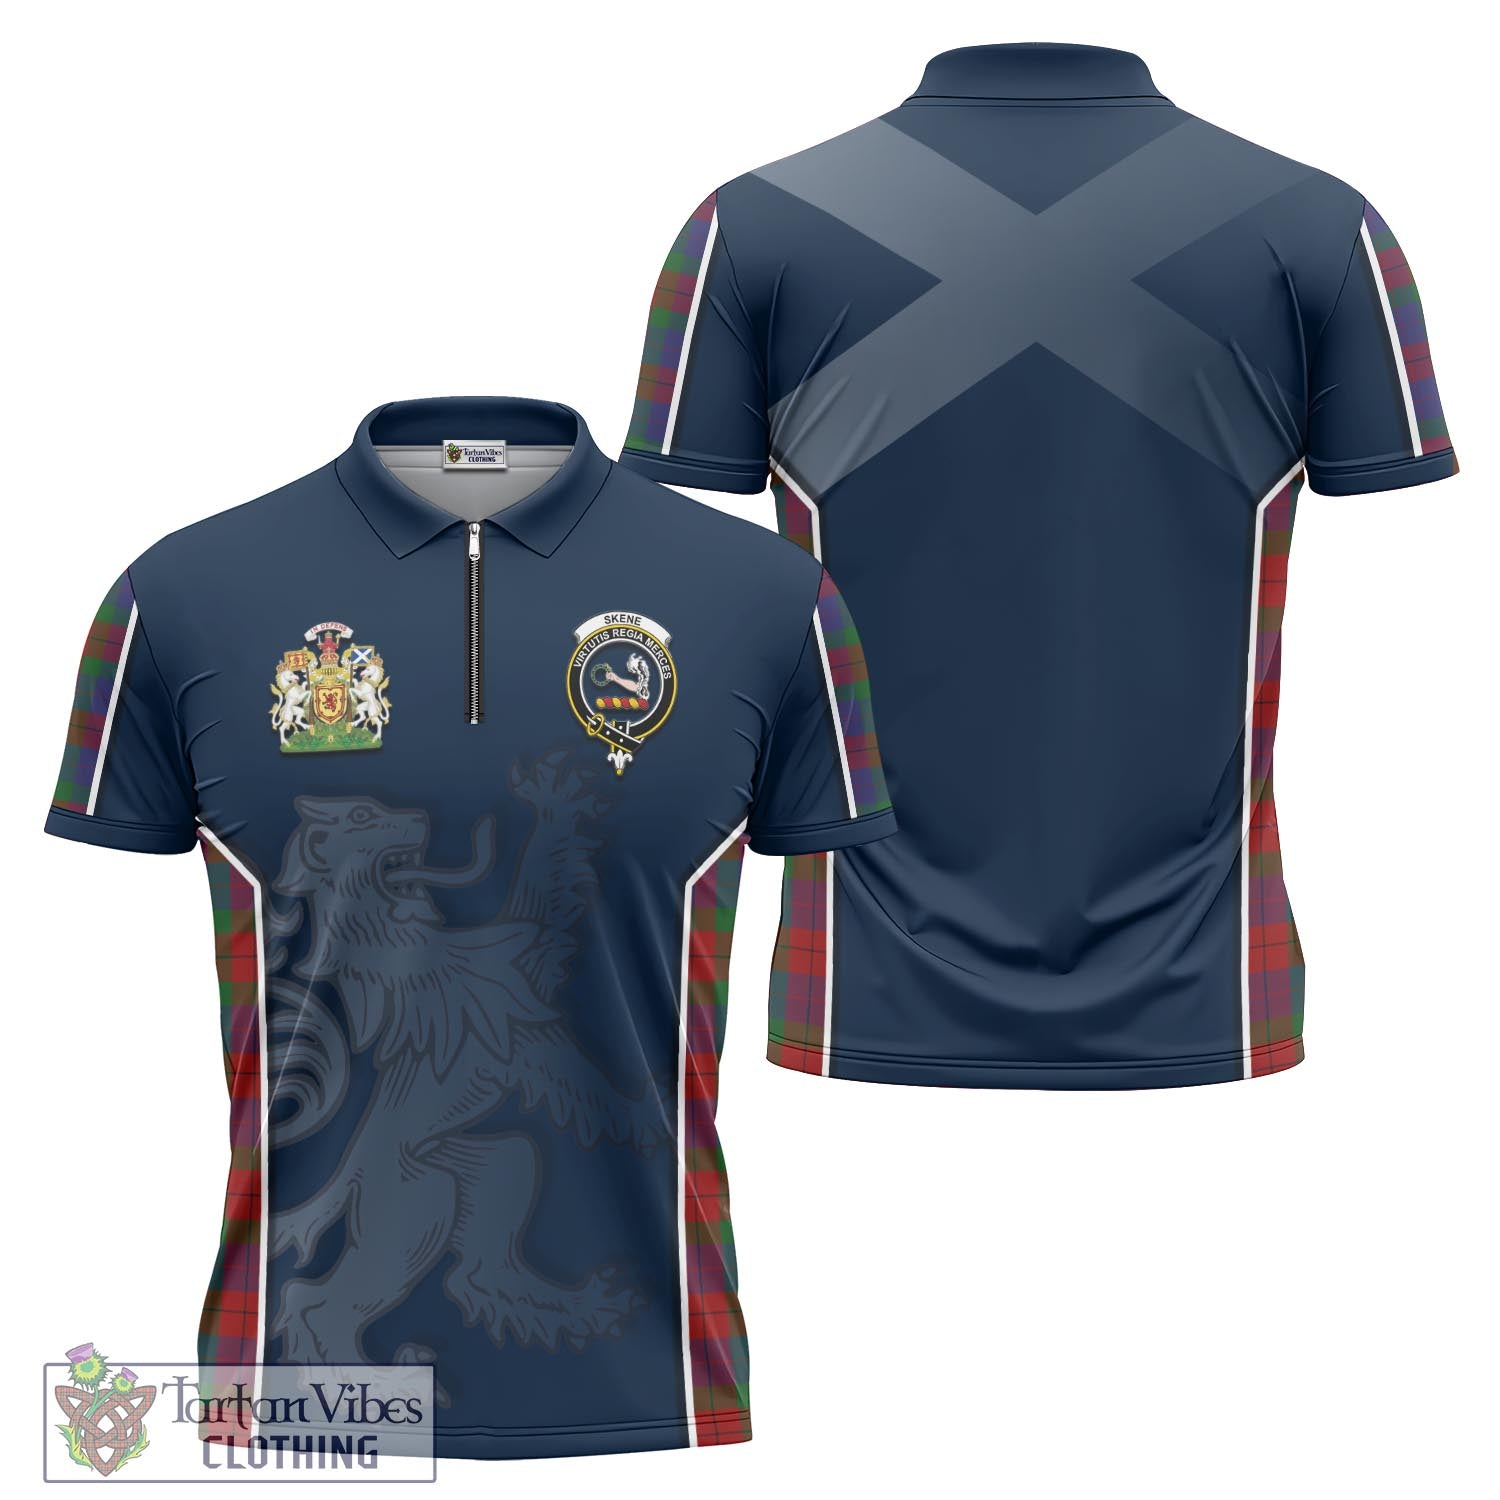 Tartan Vibes Clothing Skene of Cromar Tartan Zipper Polo Shirt with Family Crest and Lion Rampant Vibes Sport Style